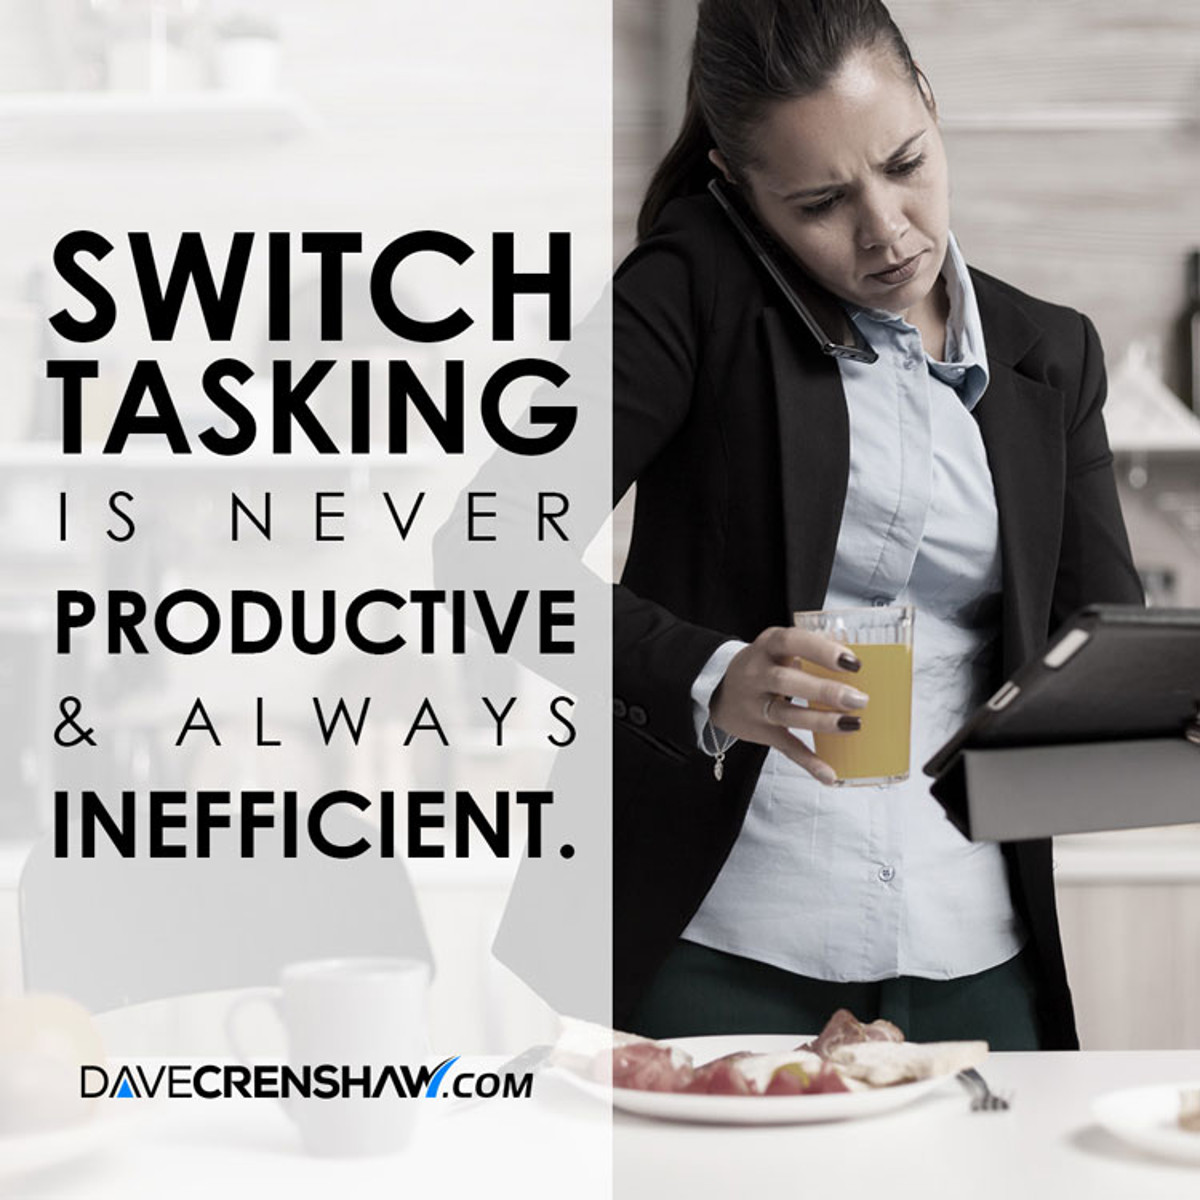 Switchtasking is never productive and always inefficient